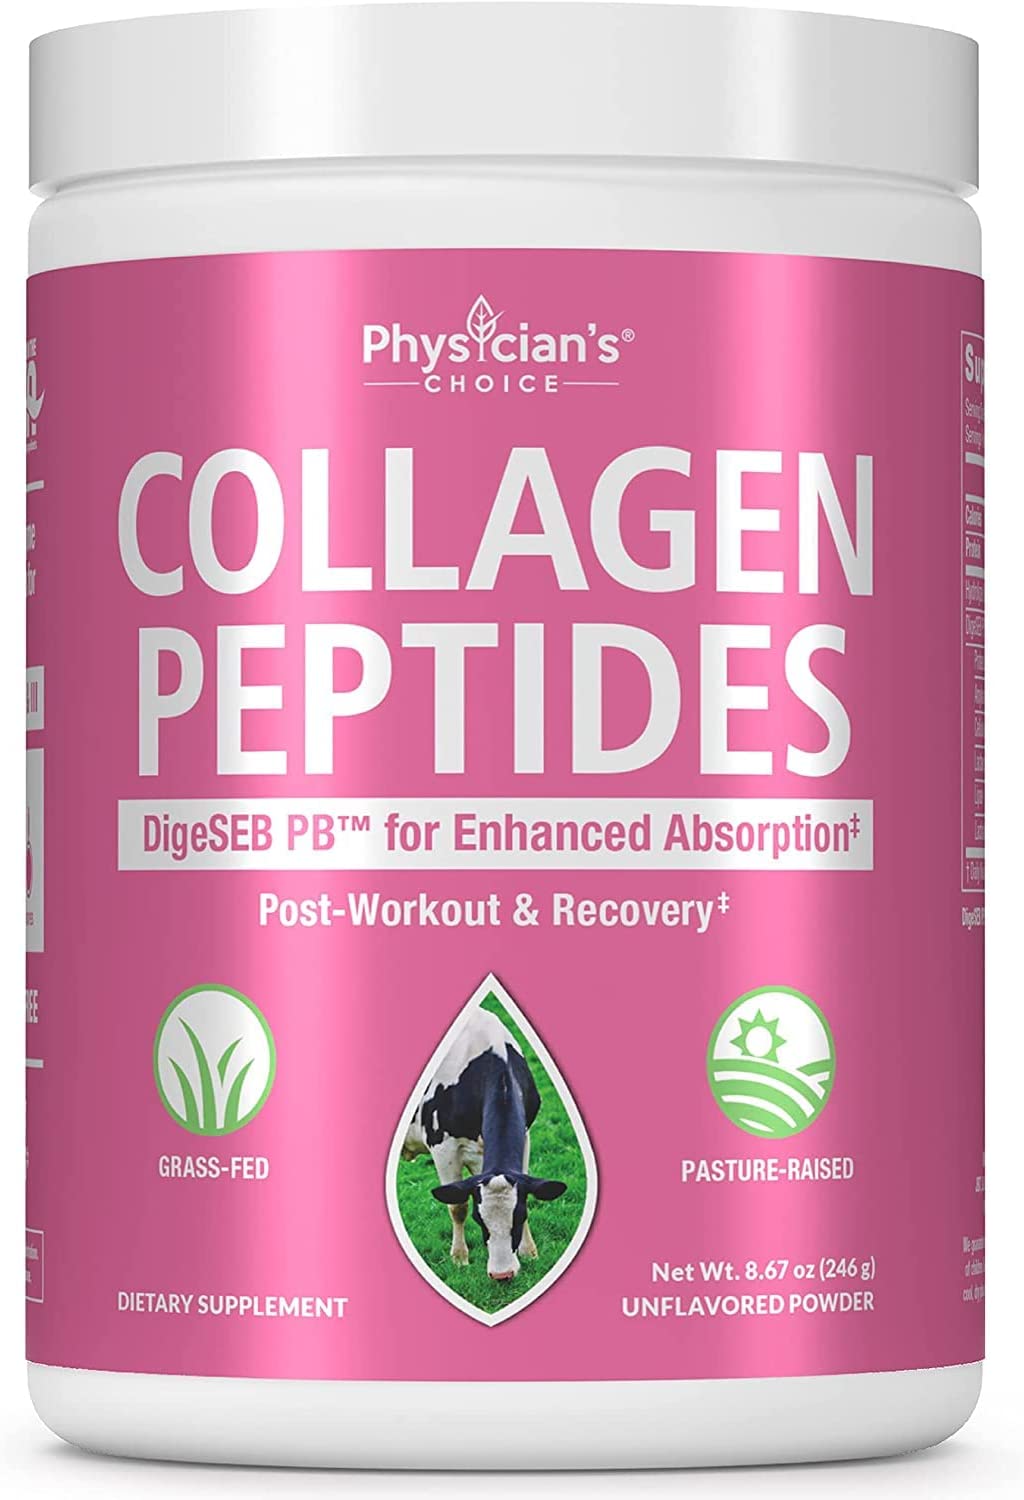 Physician’s CHOICE Unflavored Collagen Peptide Powder, 8.67-Ounce